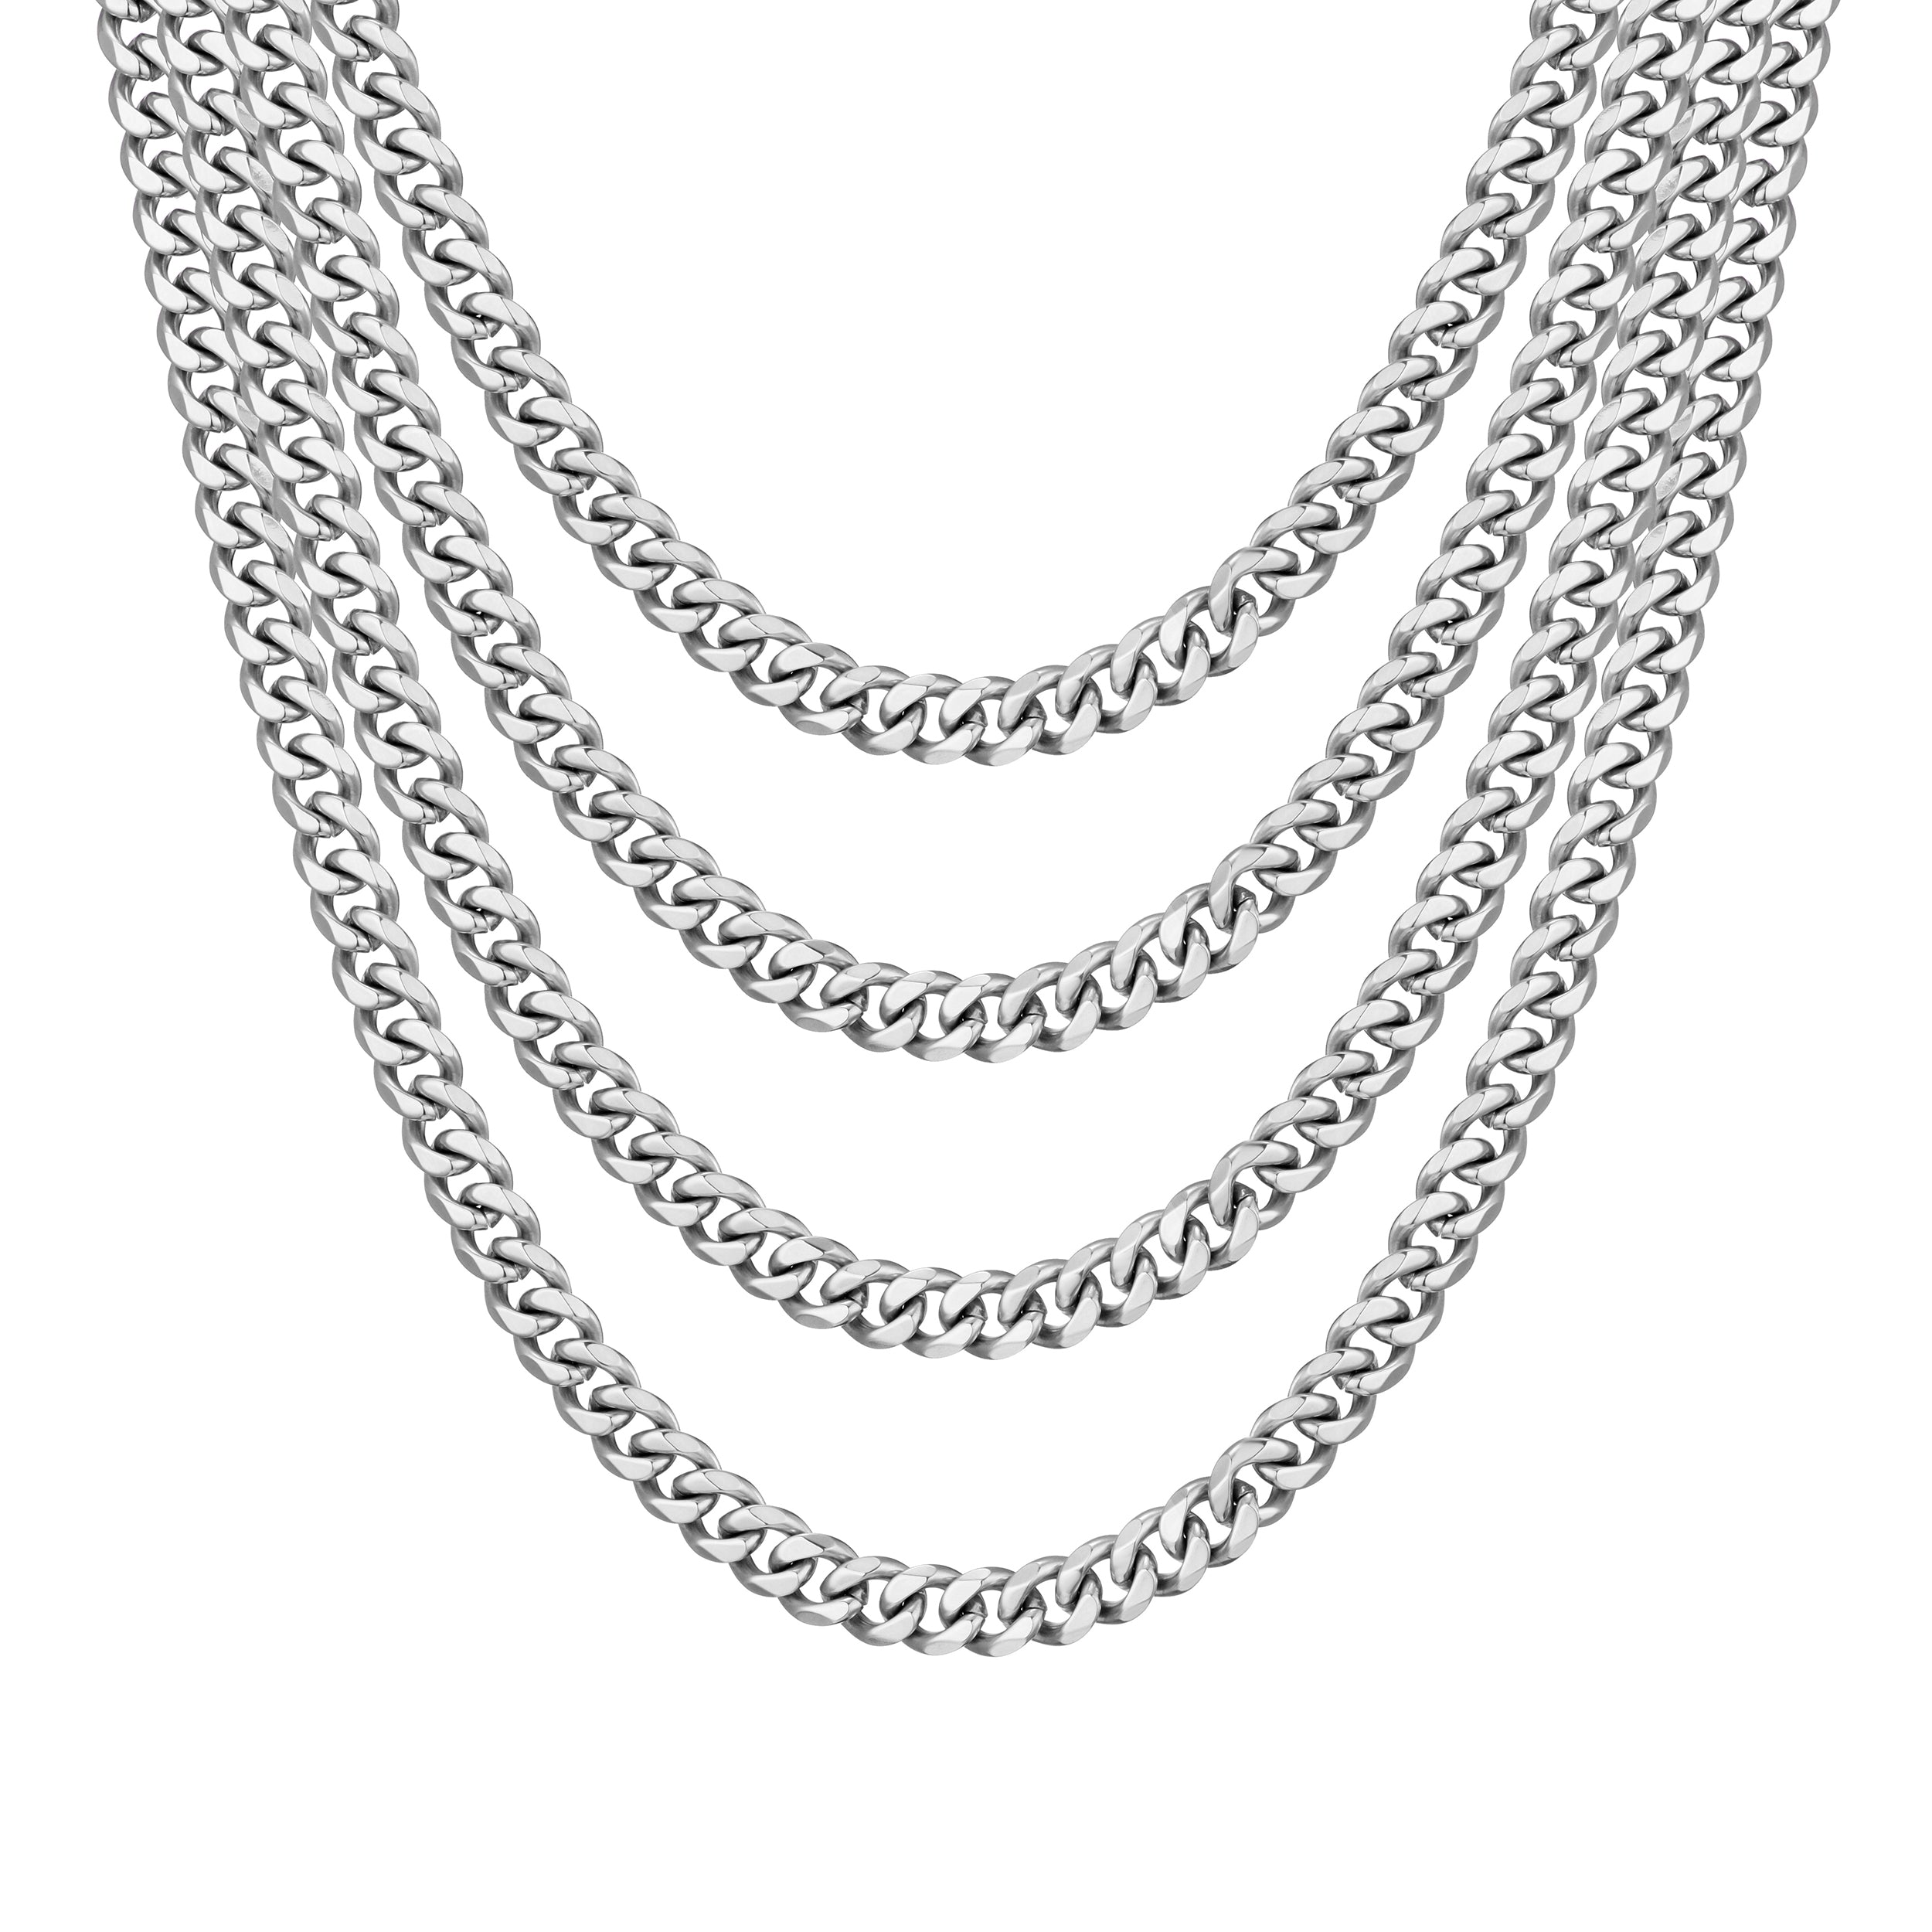 Men's 9mm Stainless Steel 18-24 Inch Curb Chain Necklace by Philip Jones Jewellery